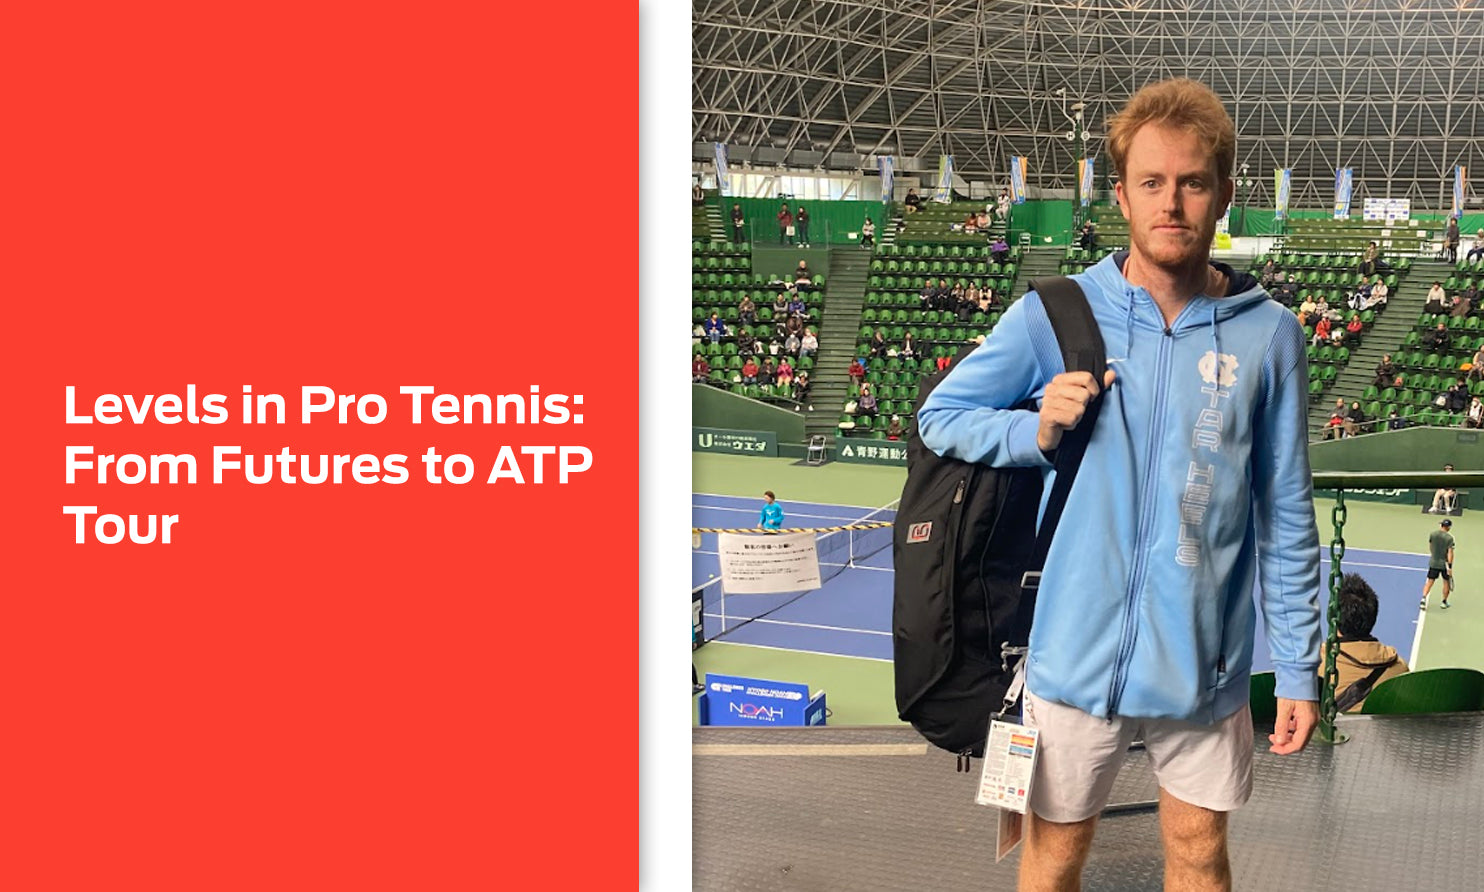 Levels in Pro Tennis: From Futures to ATP Tour